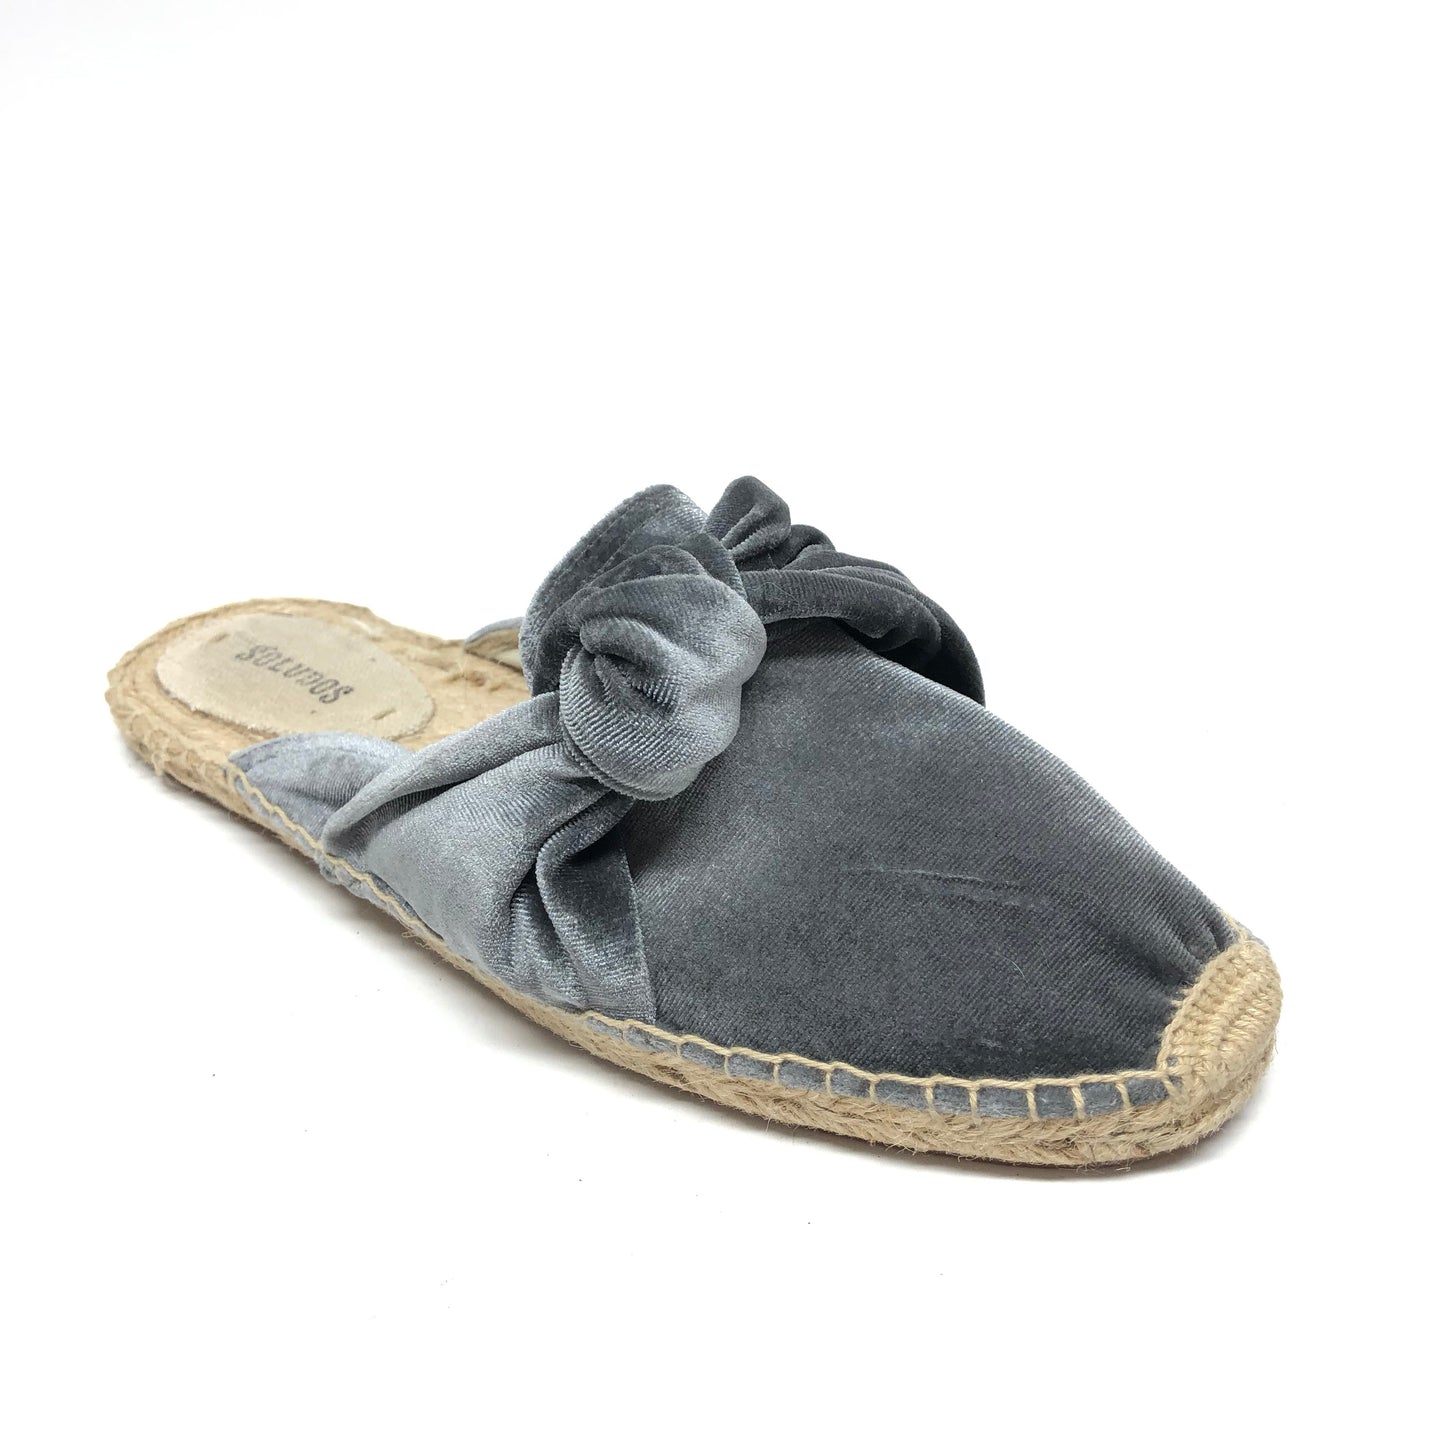 Grey Sandals Flats Soludos, Size 8.5